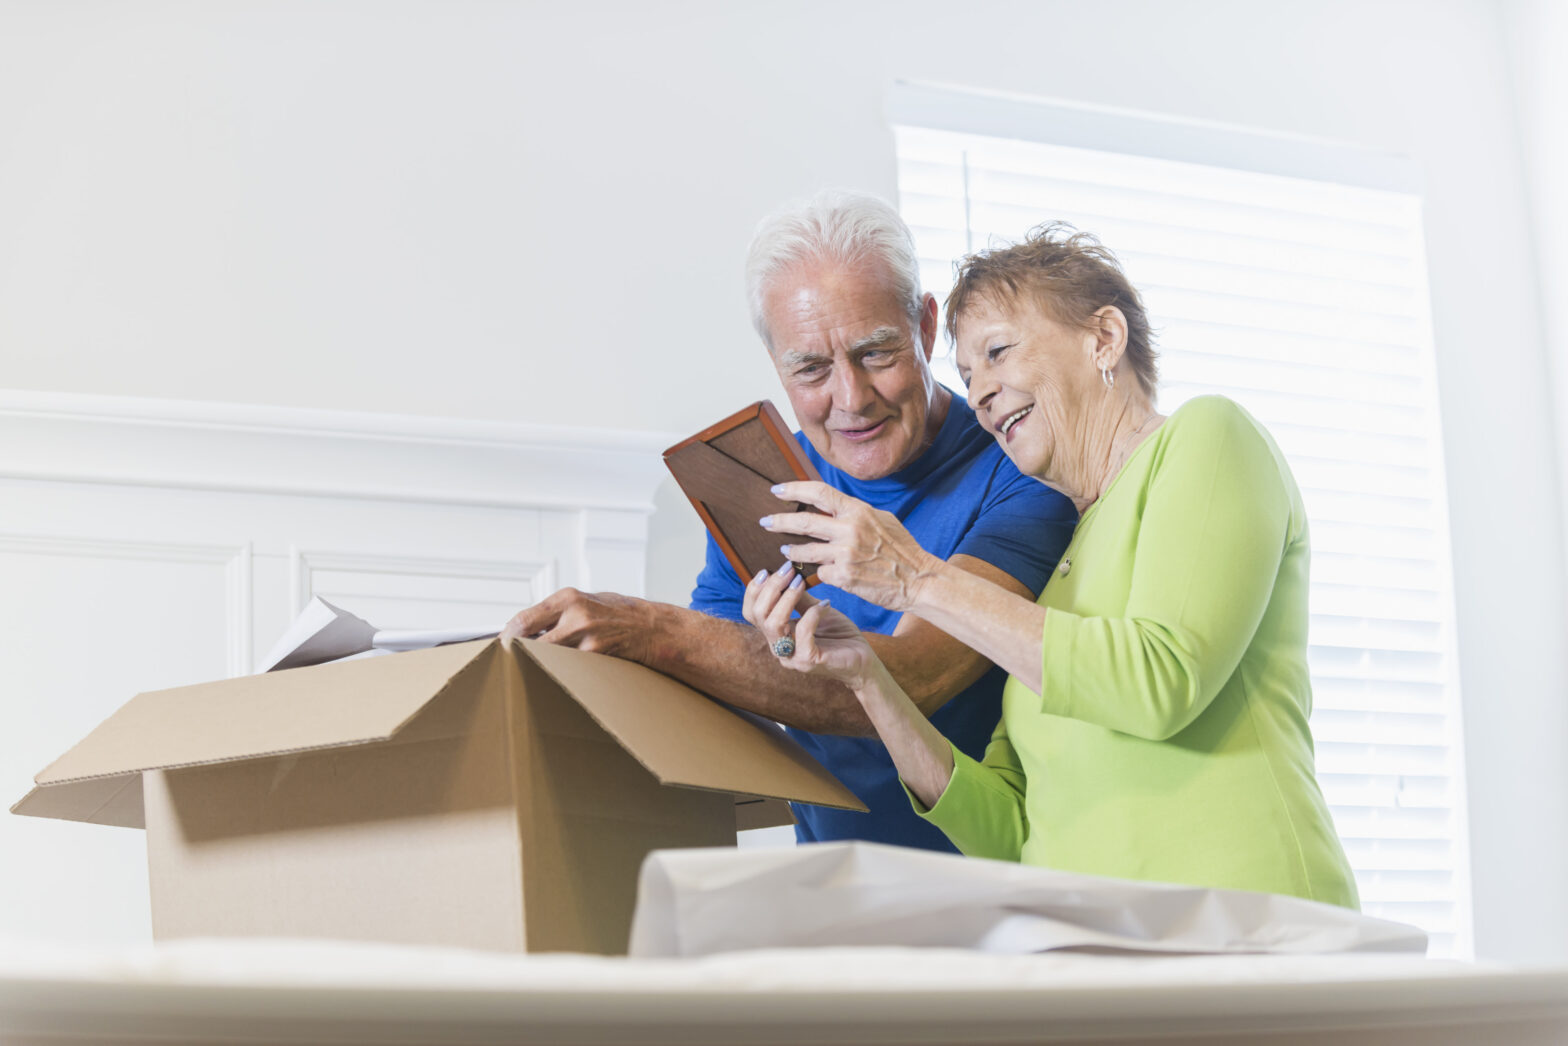 Senior couple looking at photo in a picture frame while packing a cardboard box